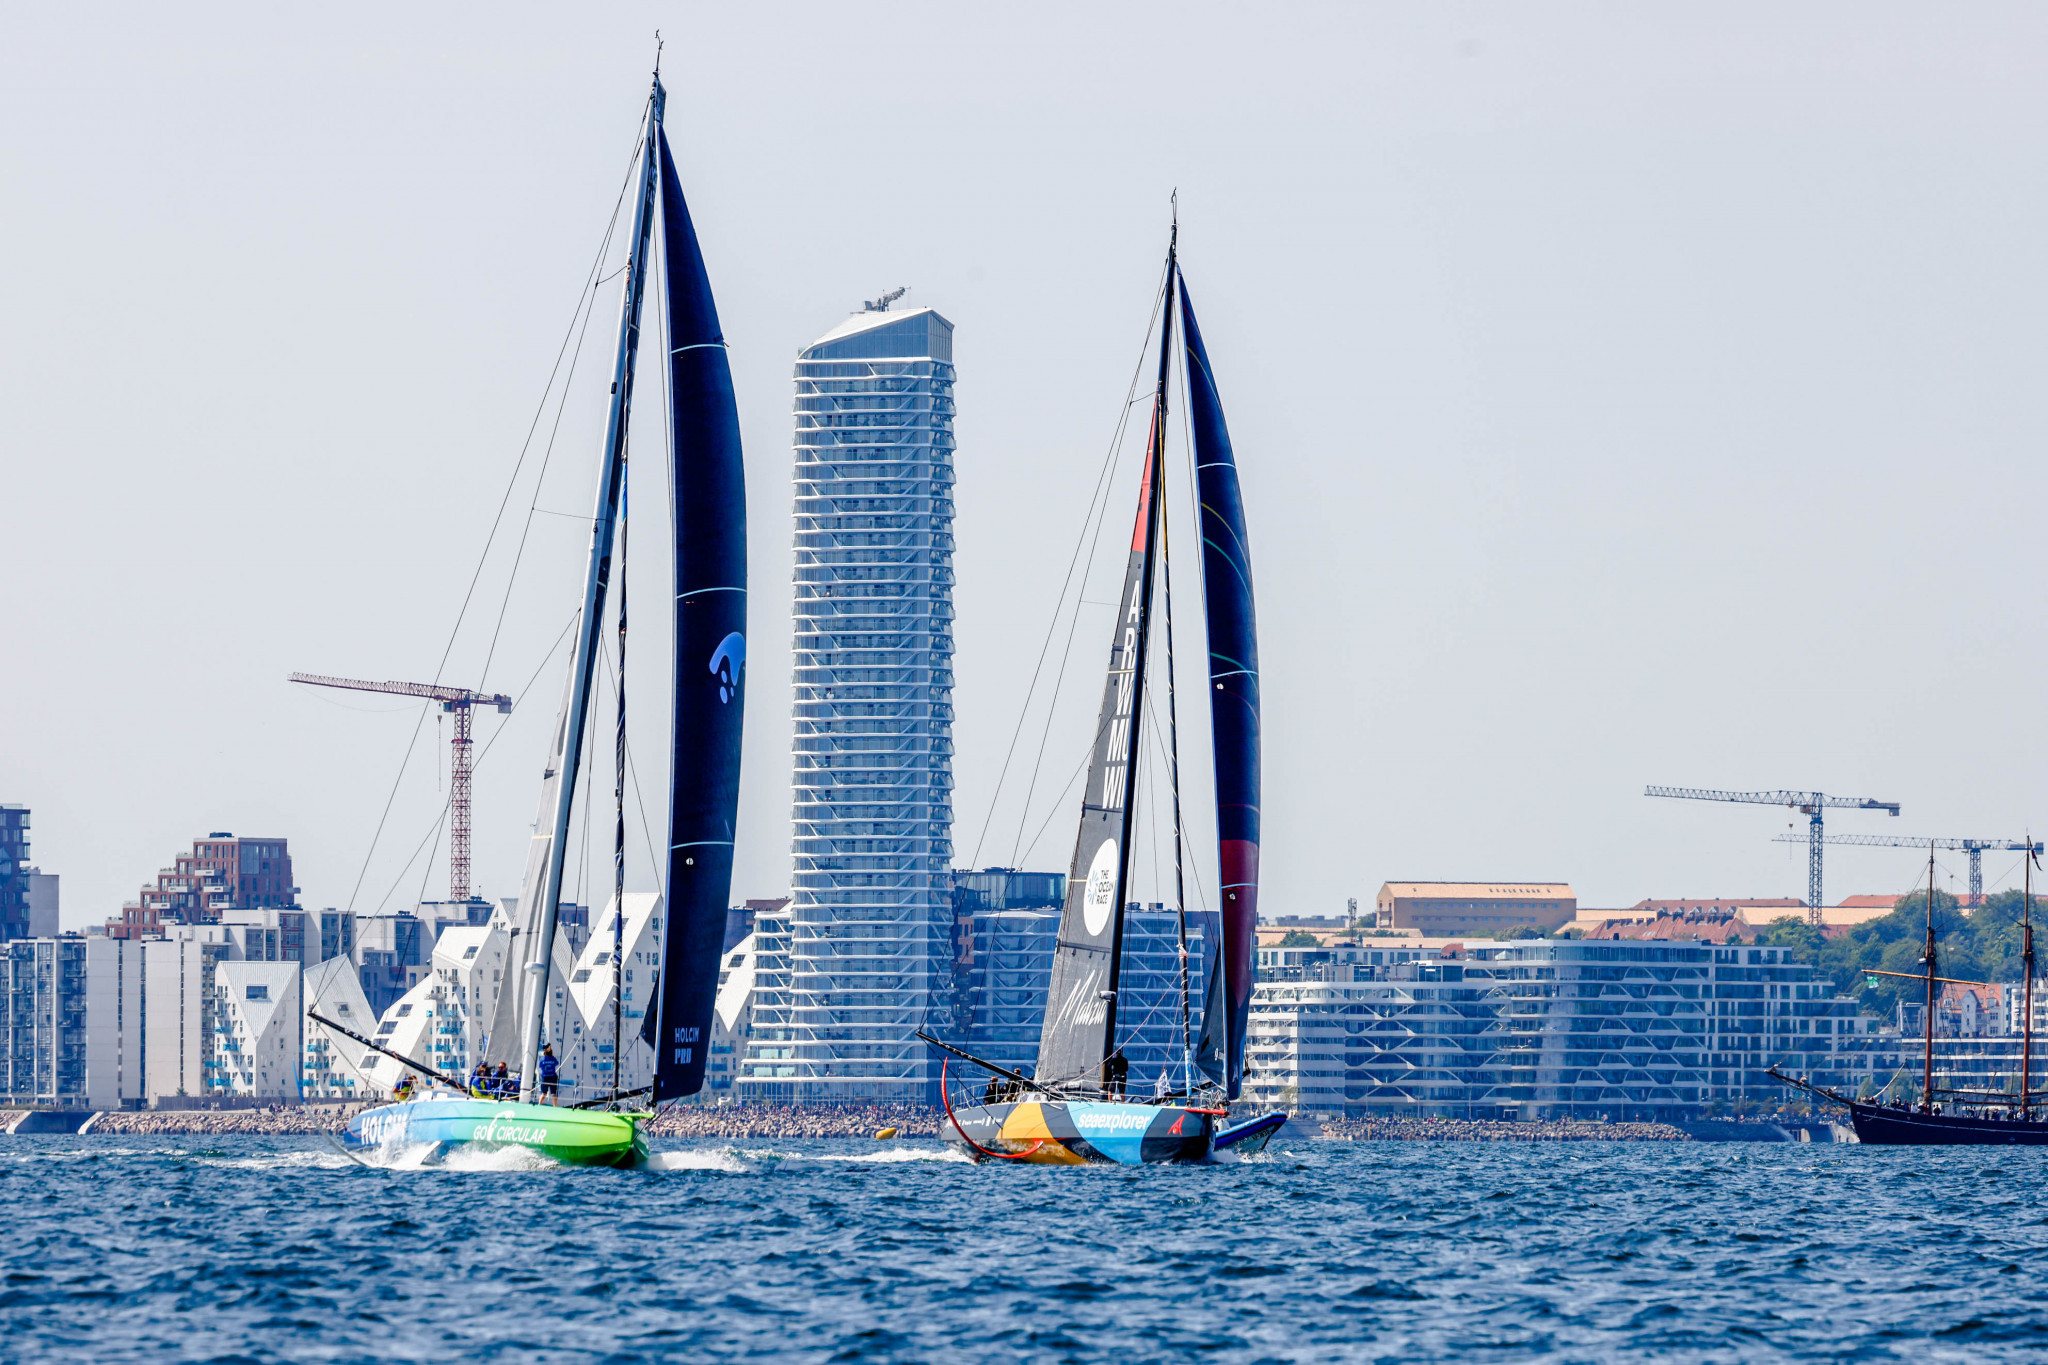 The 11th Hour Racing Team want other sports to follow sailing's lead in implementing sustainability plans at events ©The Ocean Race